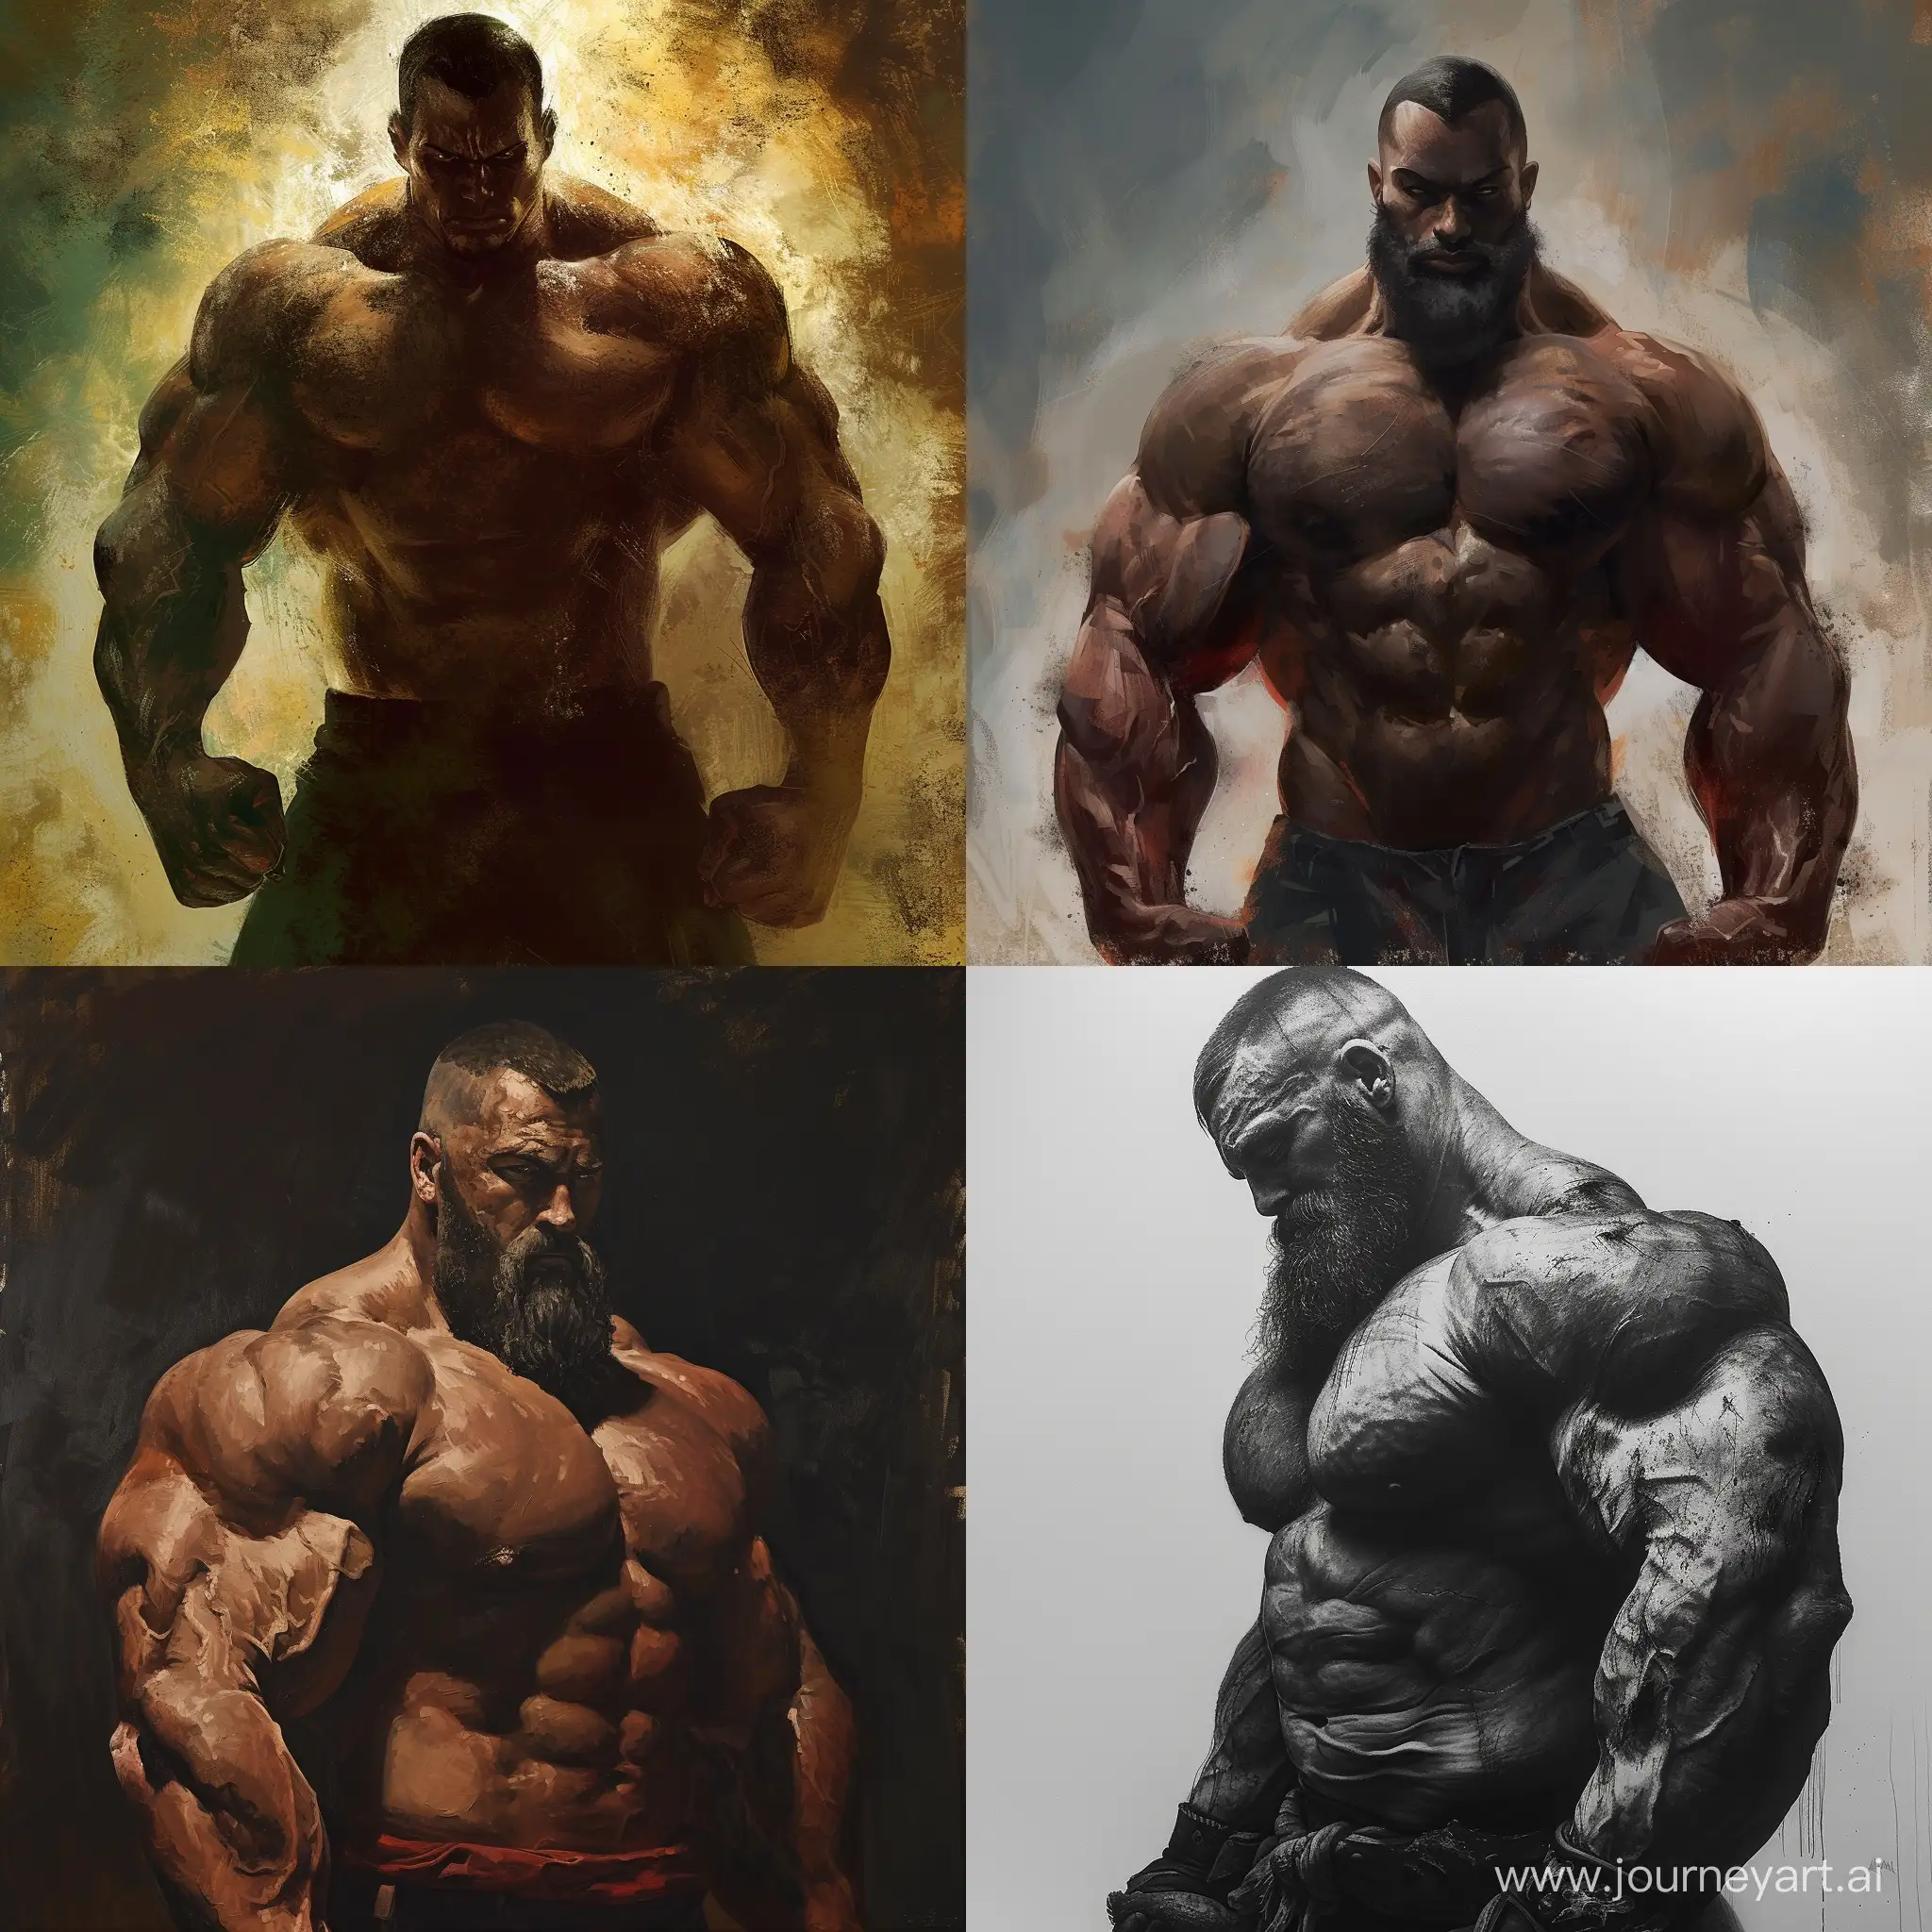 Muscular-Man-with-Intense-Strength-Powerful-Bodybuilder-Image